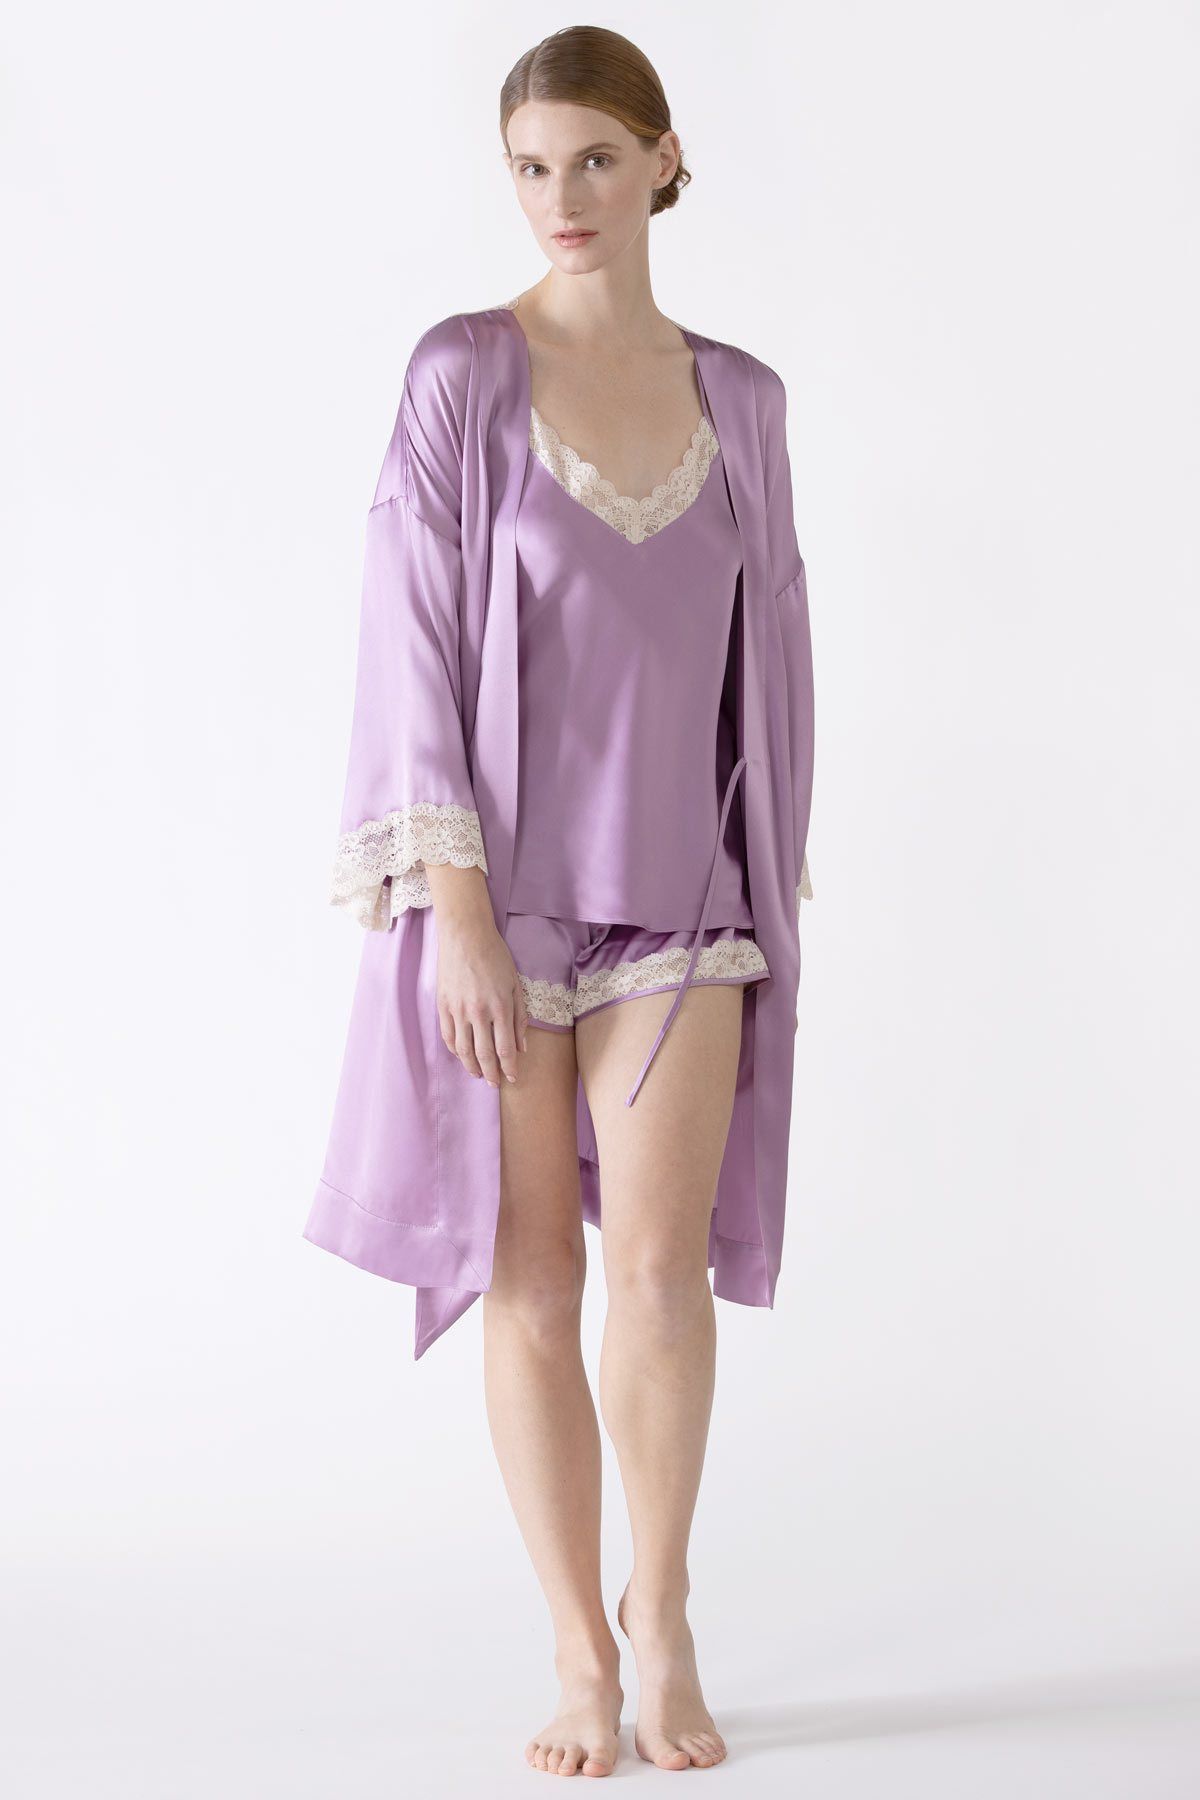 Yamamay violet lace padded underwired Camisole Top sleepwear